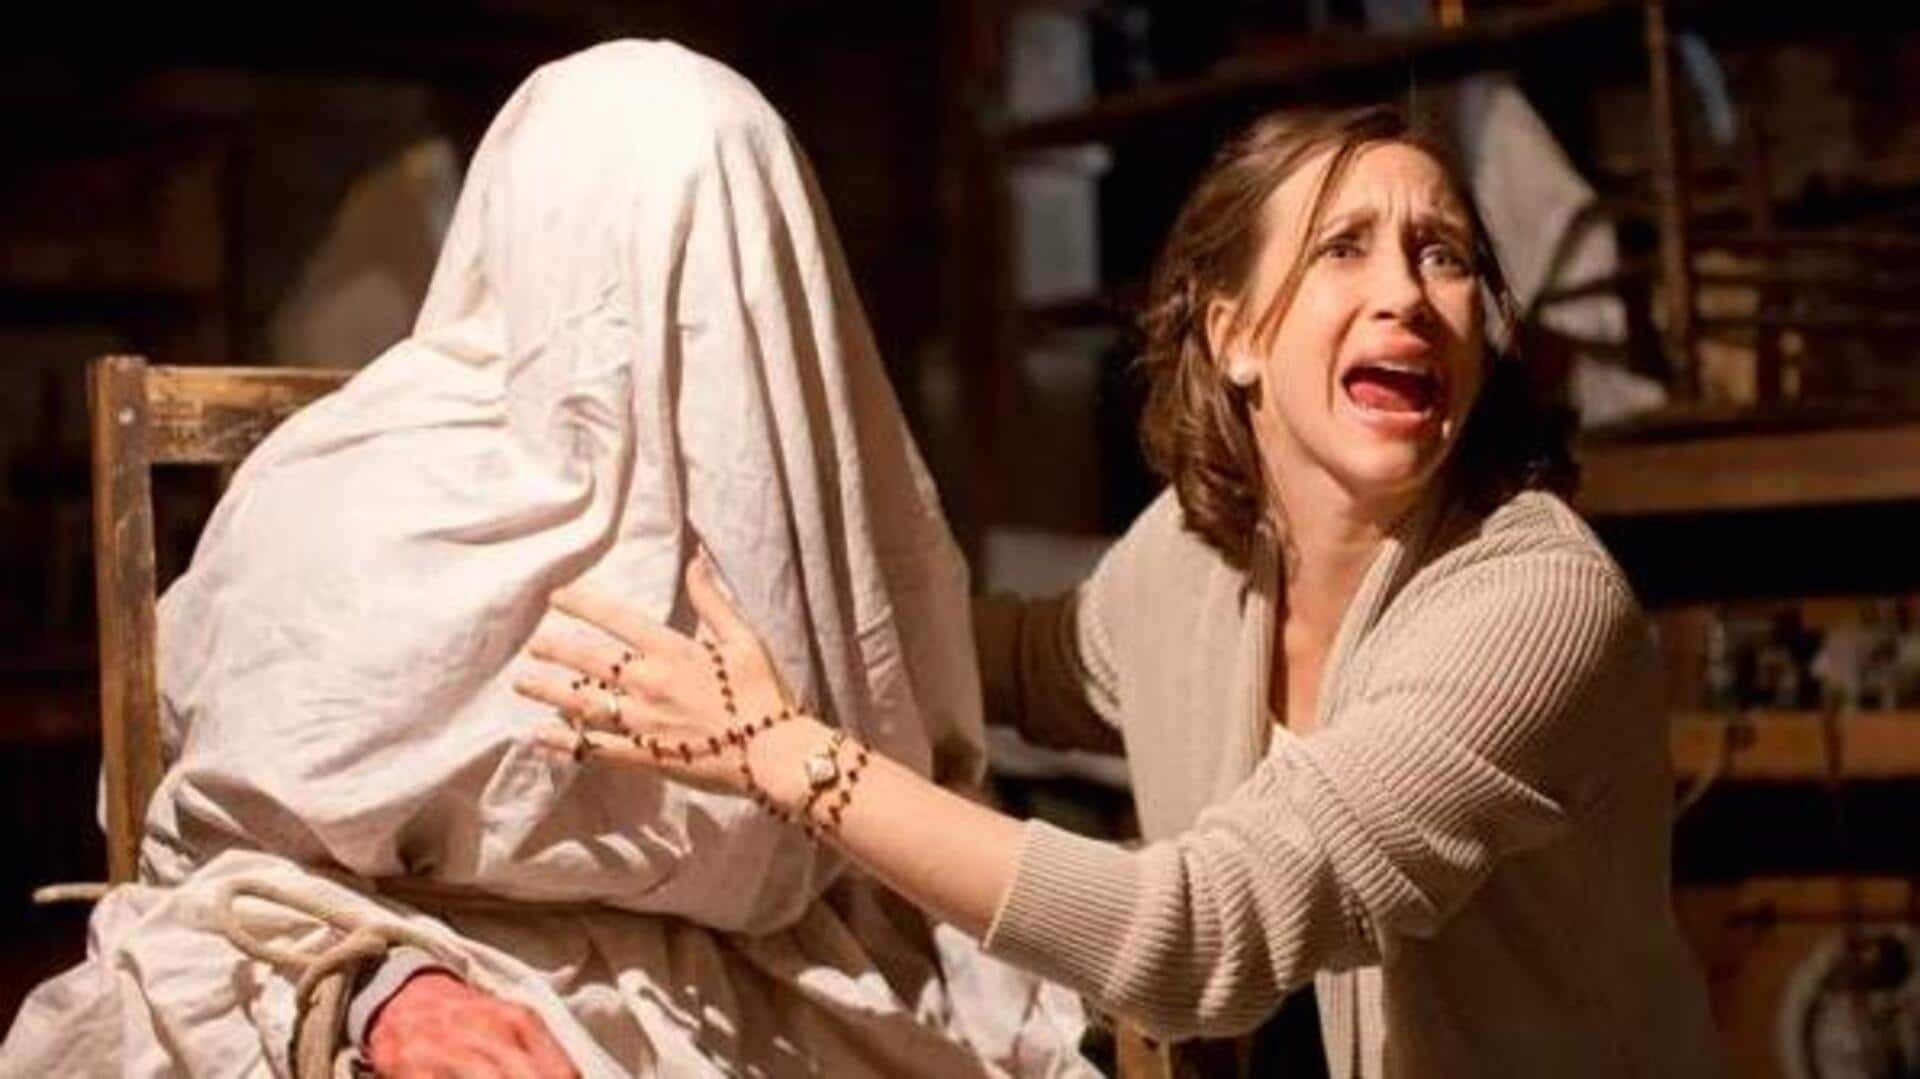 Top 'The Conjuring' films that will give you the chills